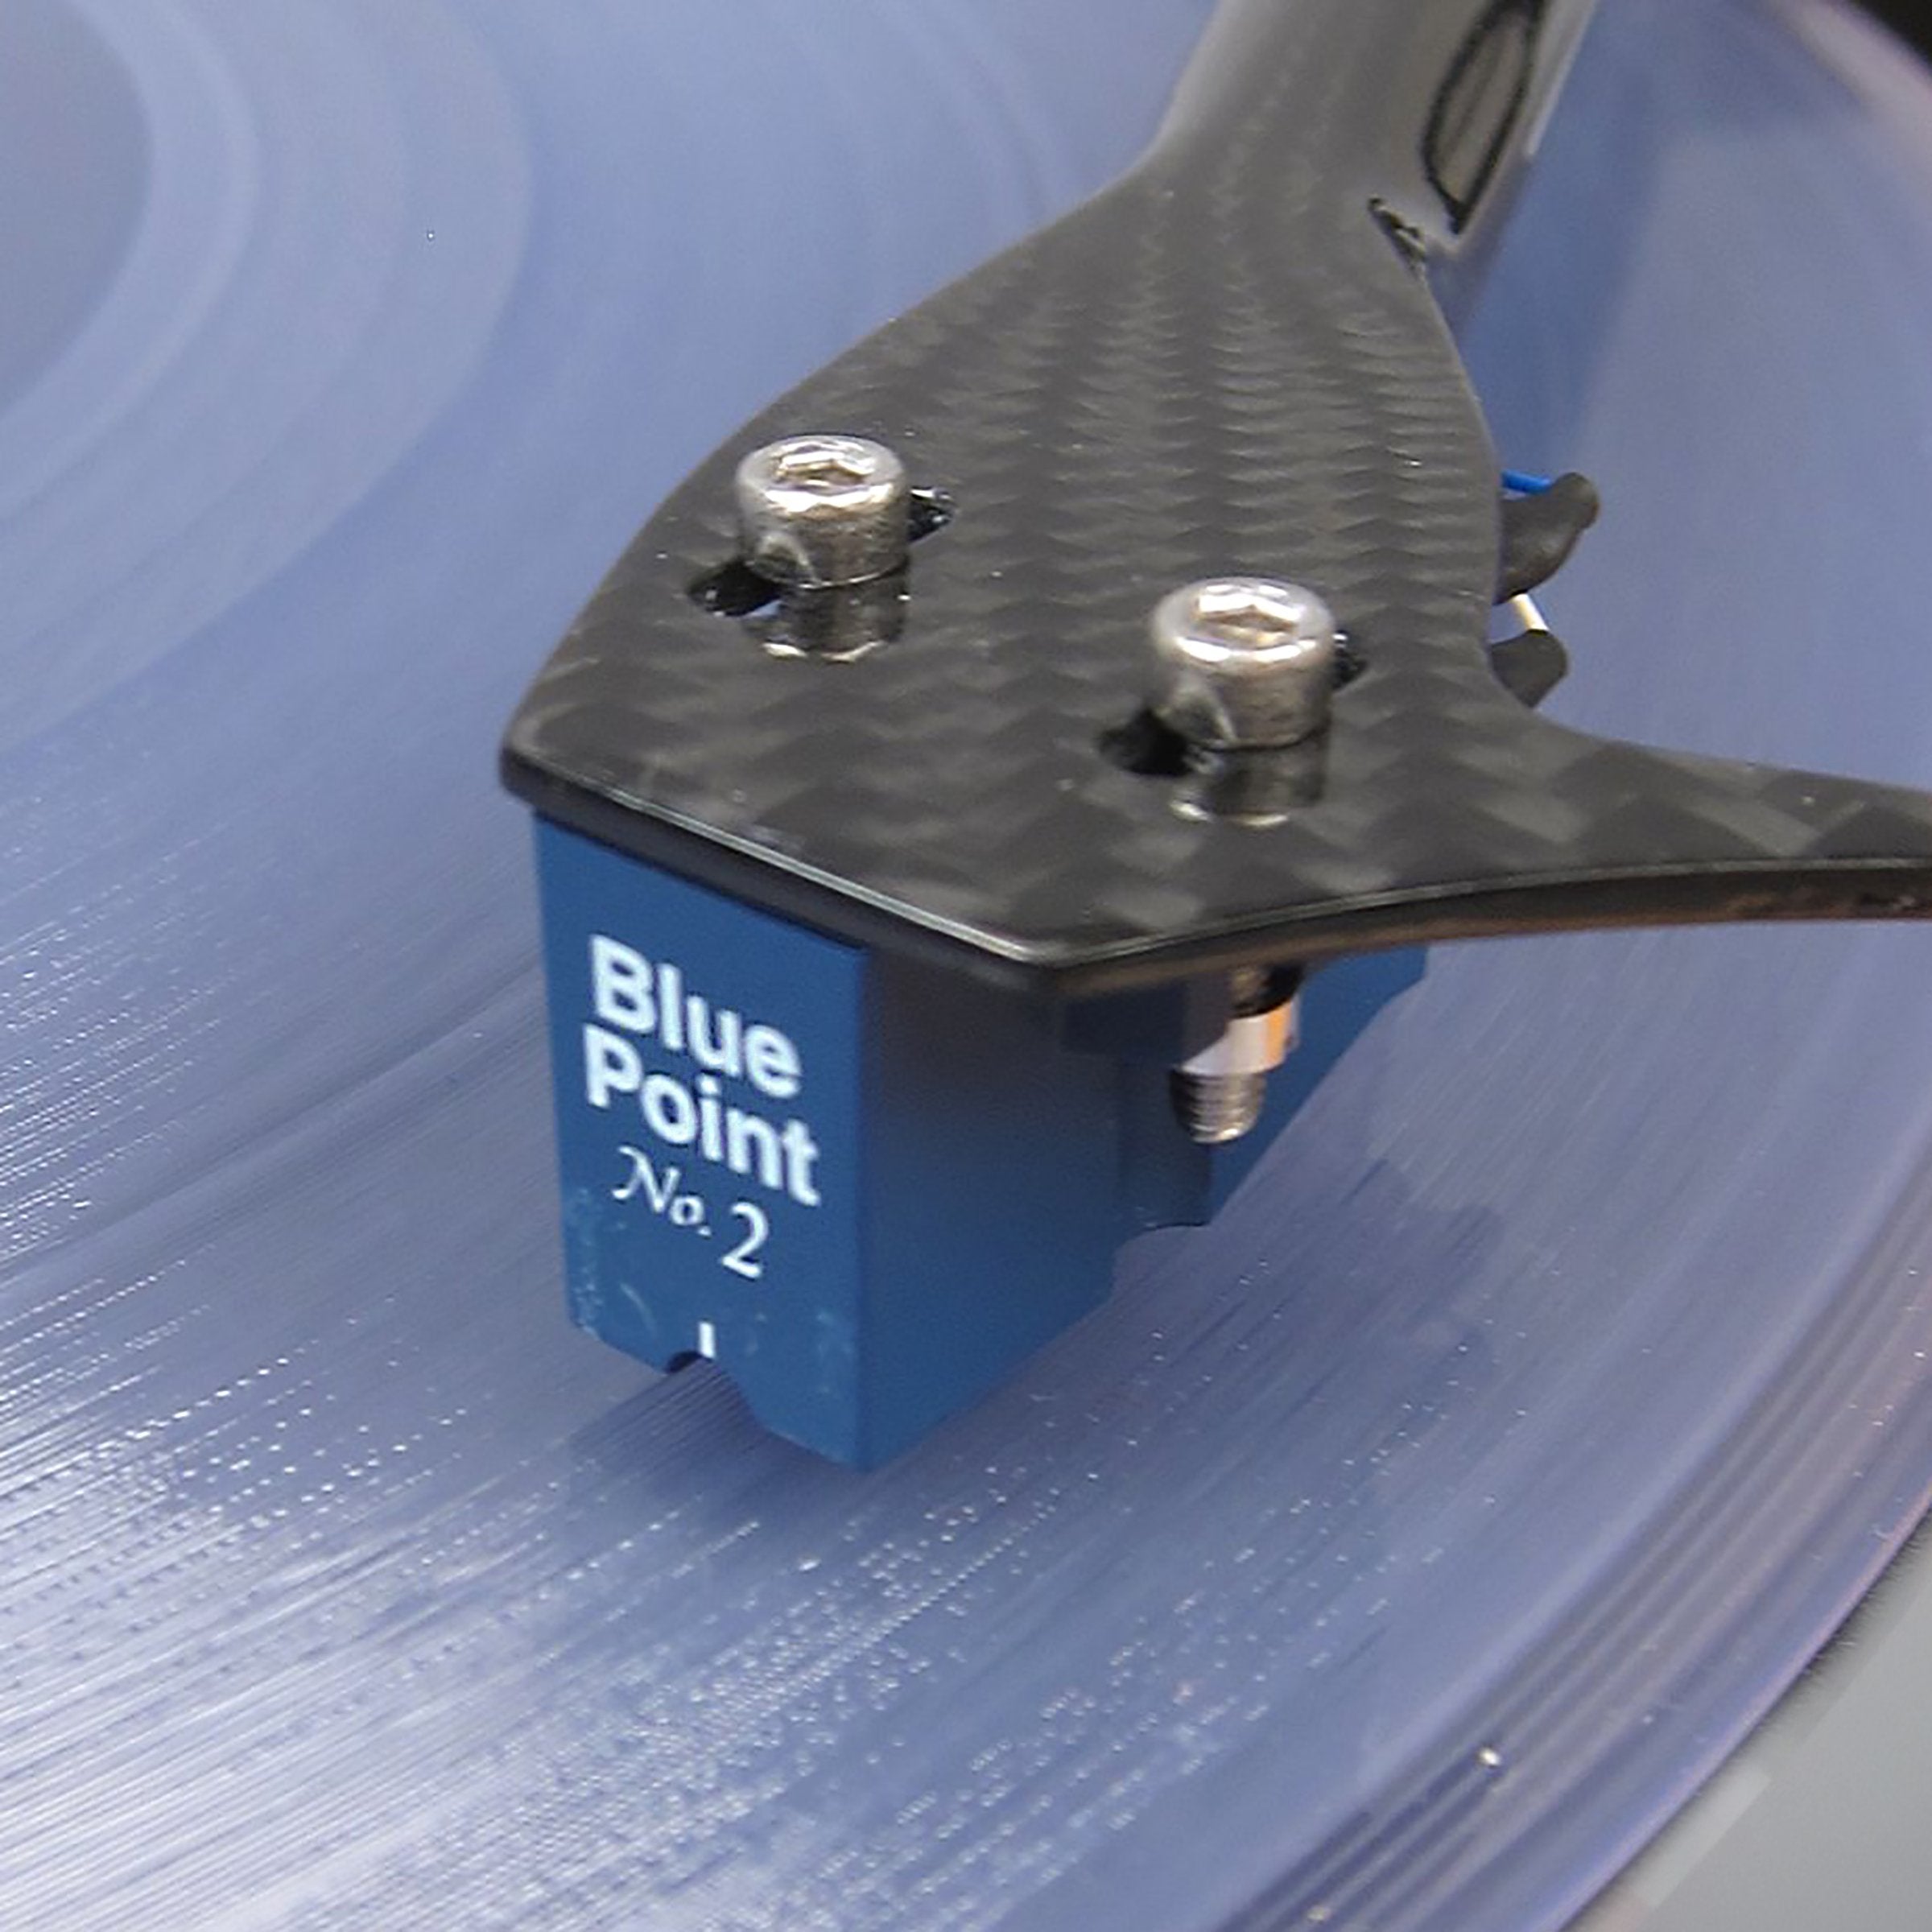 Pro-Ject: The Classic SB Turntable (Blue Point No.2) - Walnut - OPEN BOX SPECIAL